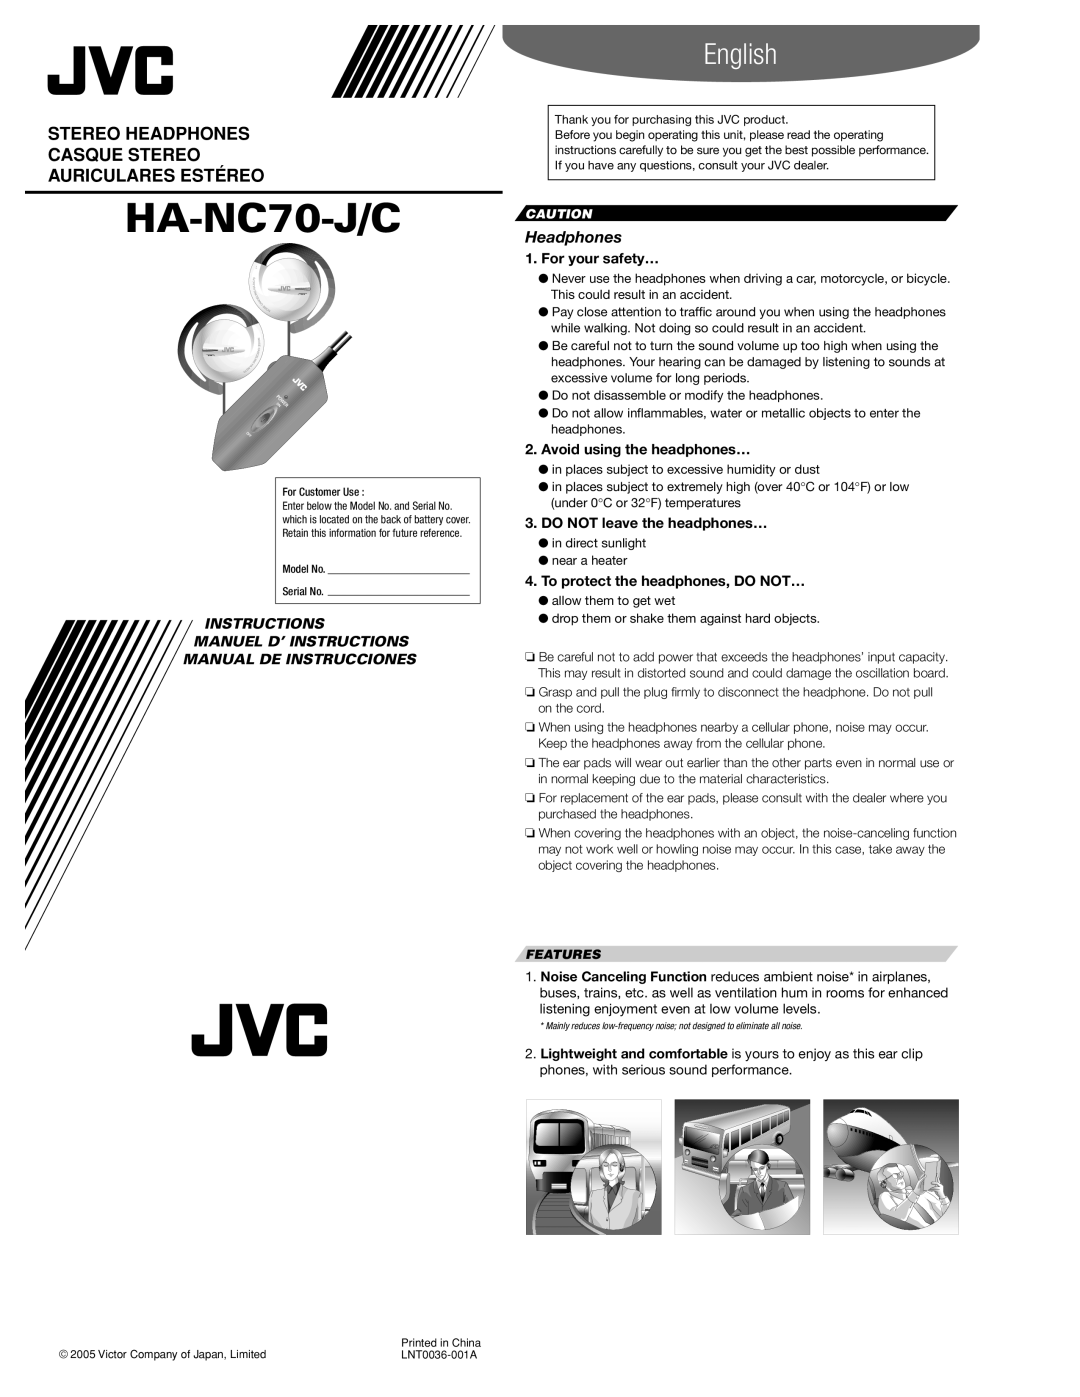 JVC HA-NC70-J/C manual Features, English, Stereo Headphones Casque Stereo Auriculares Estéreo, For your safety… 